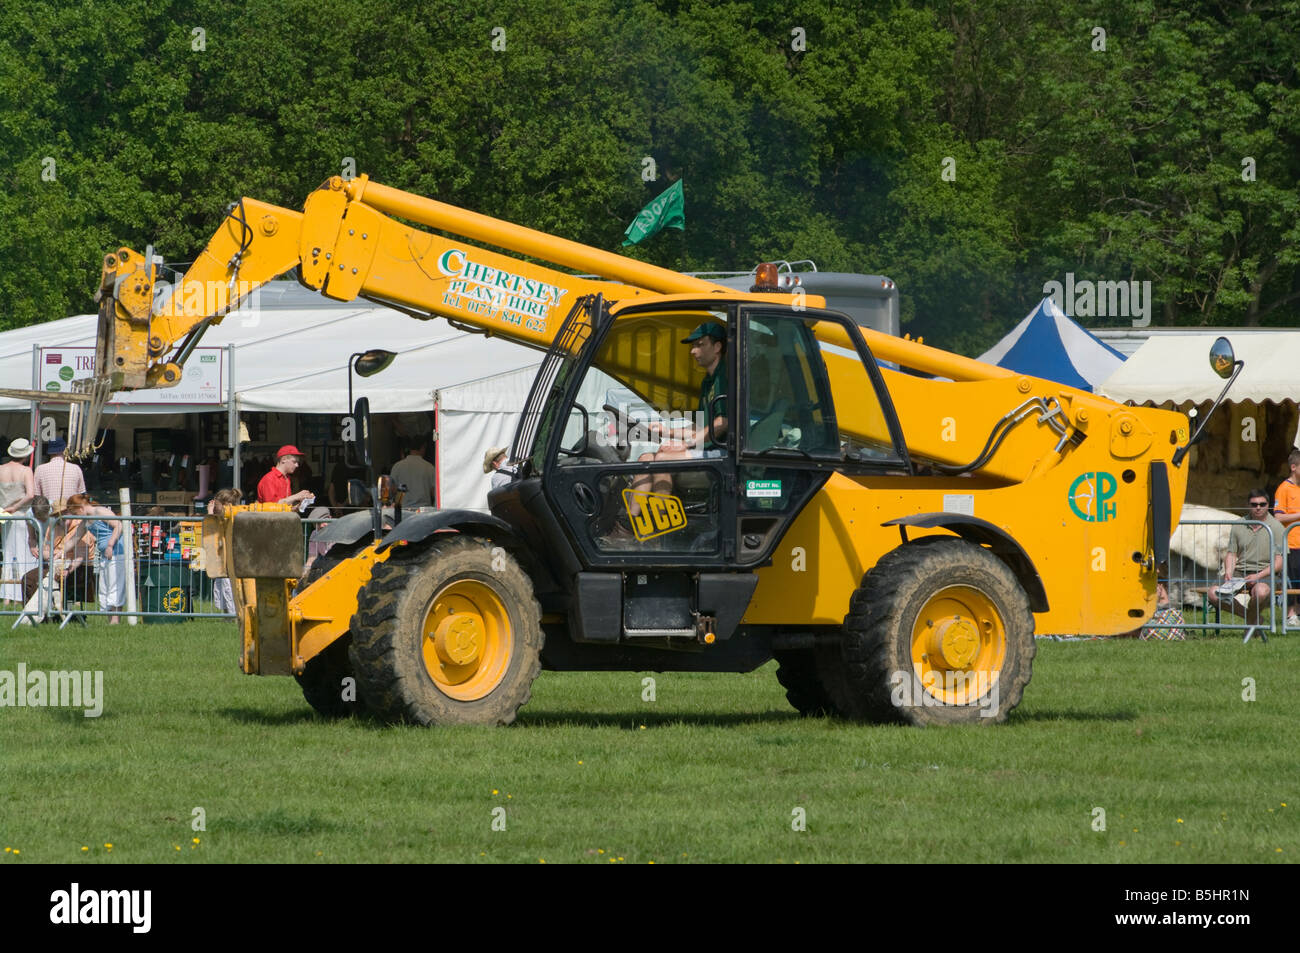 JCB at the Cowpie Rally Betchworth Surrey Farm Vehicle Machinery Stock Photo